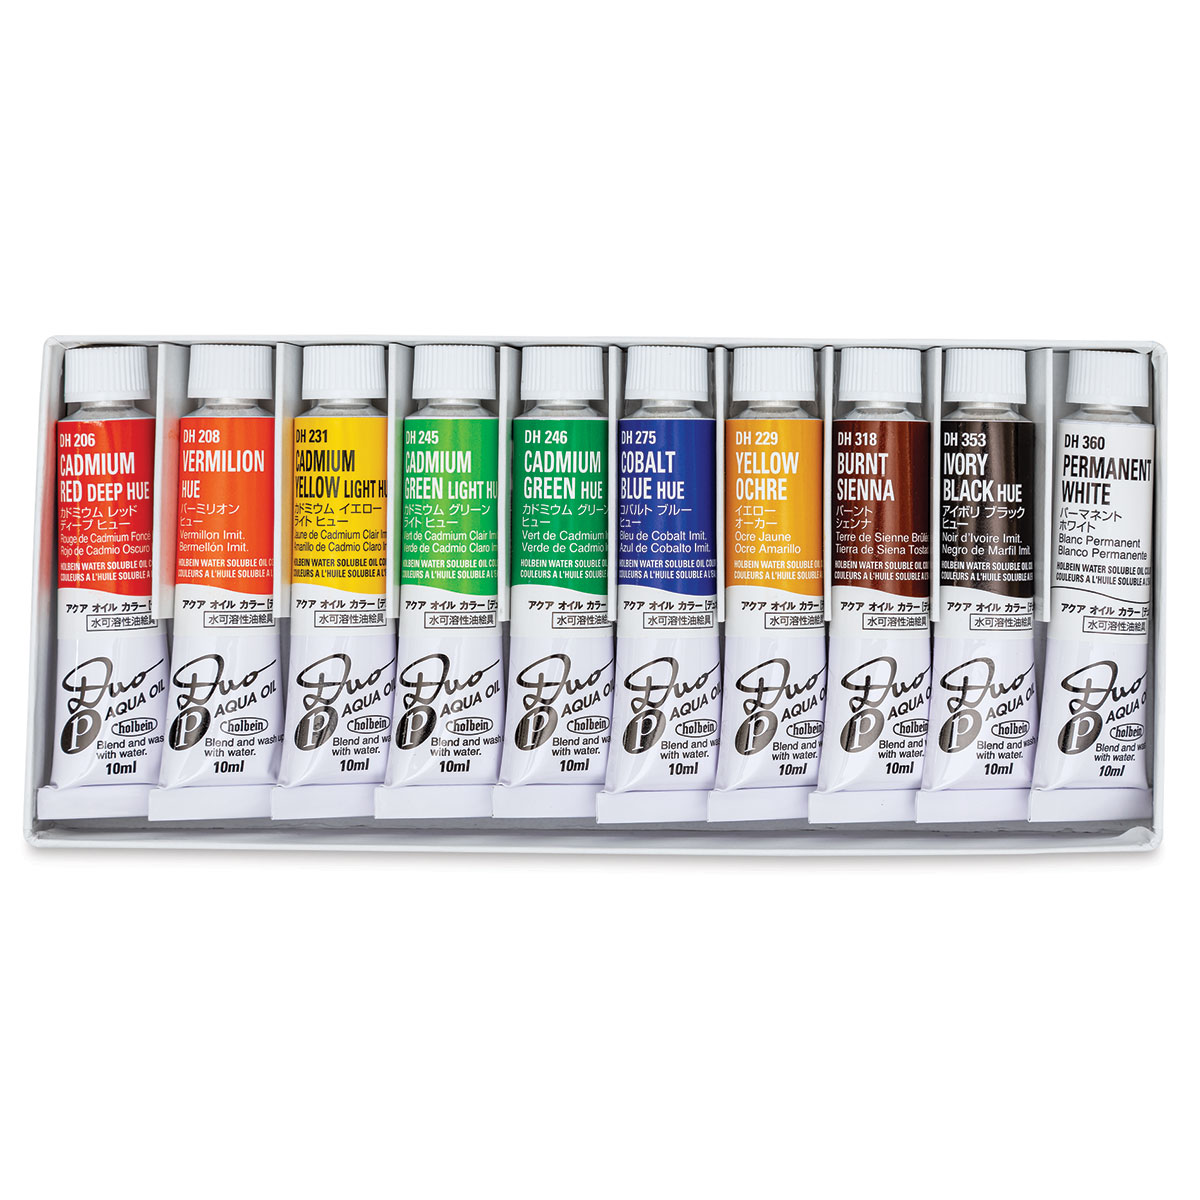  Holbein Duo Aqua Water-Soluble Oil Color AP Set of 12 20 ml  Tubes : Arts, Crafts & Sewing